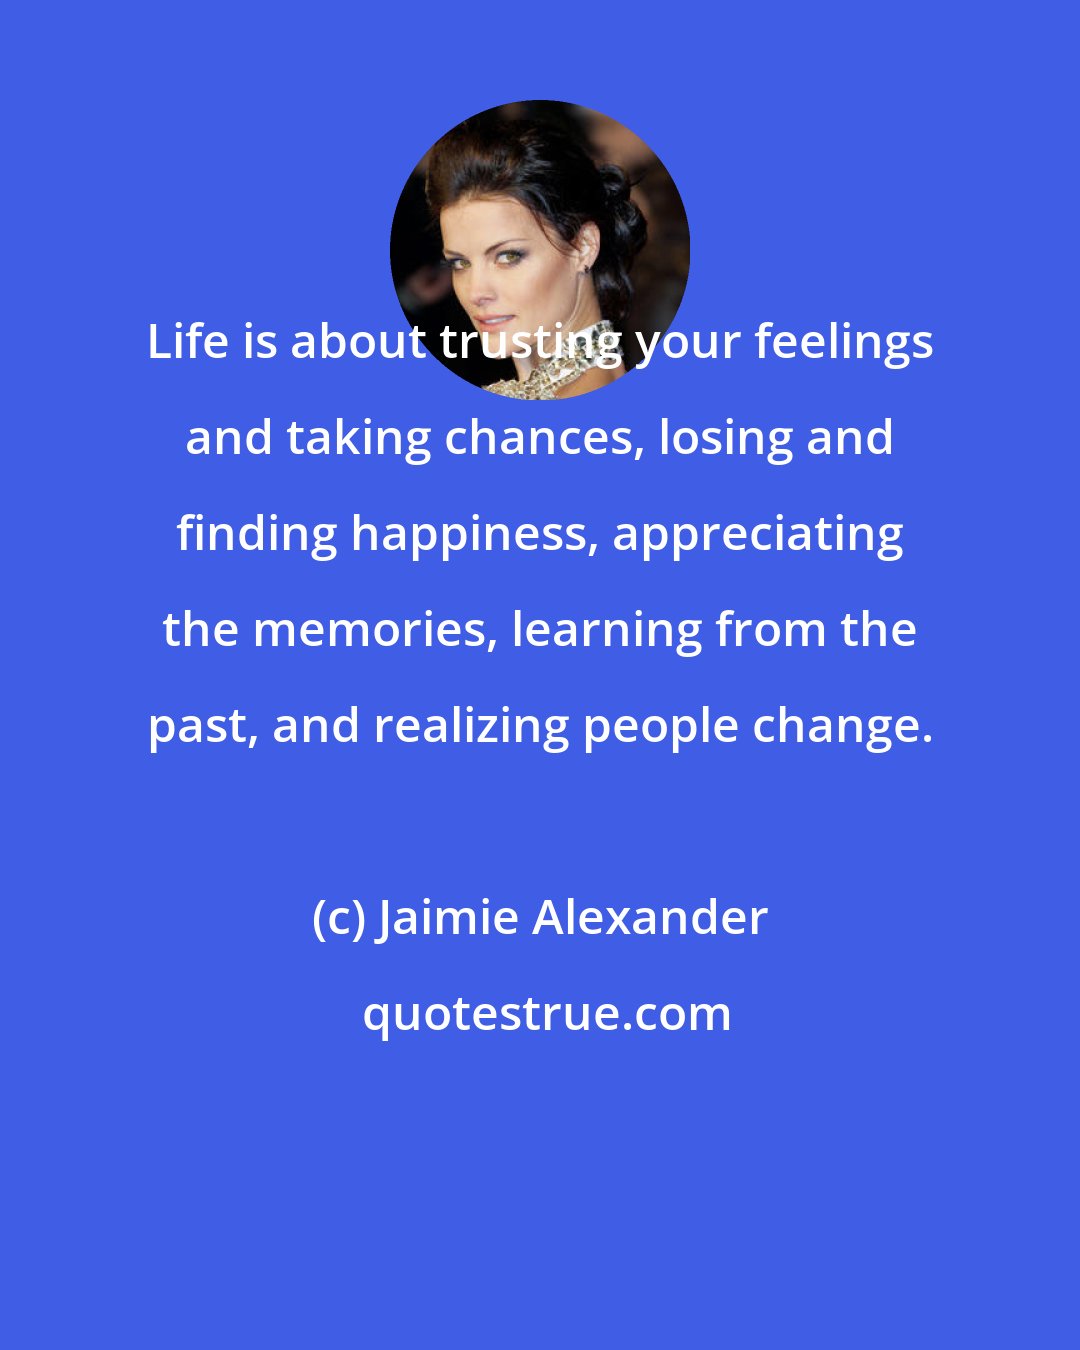 Jaimie Alexander: Life is about trusting your feelings and taking chances, losing and finding happiness, appreciating the memories, learning from the past, and realizing people change.